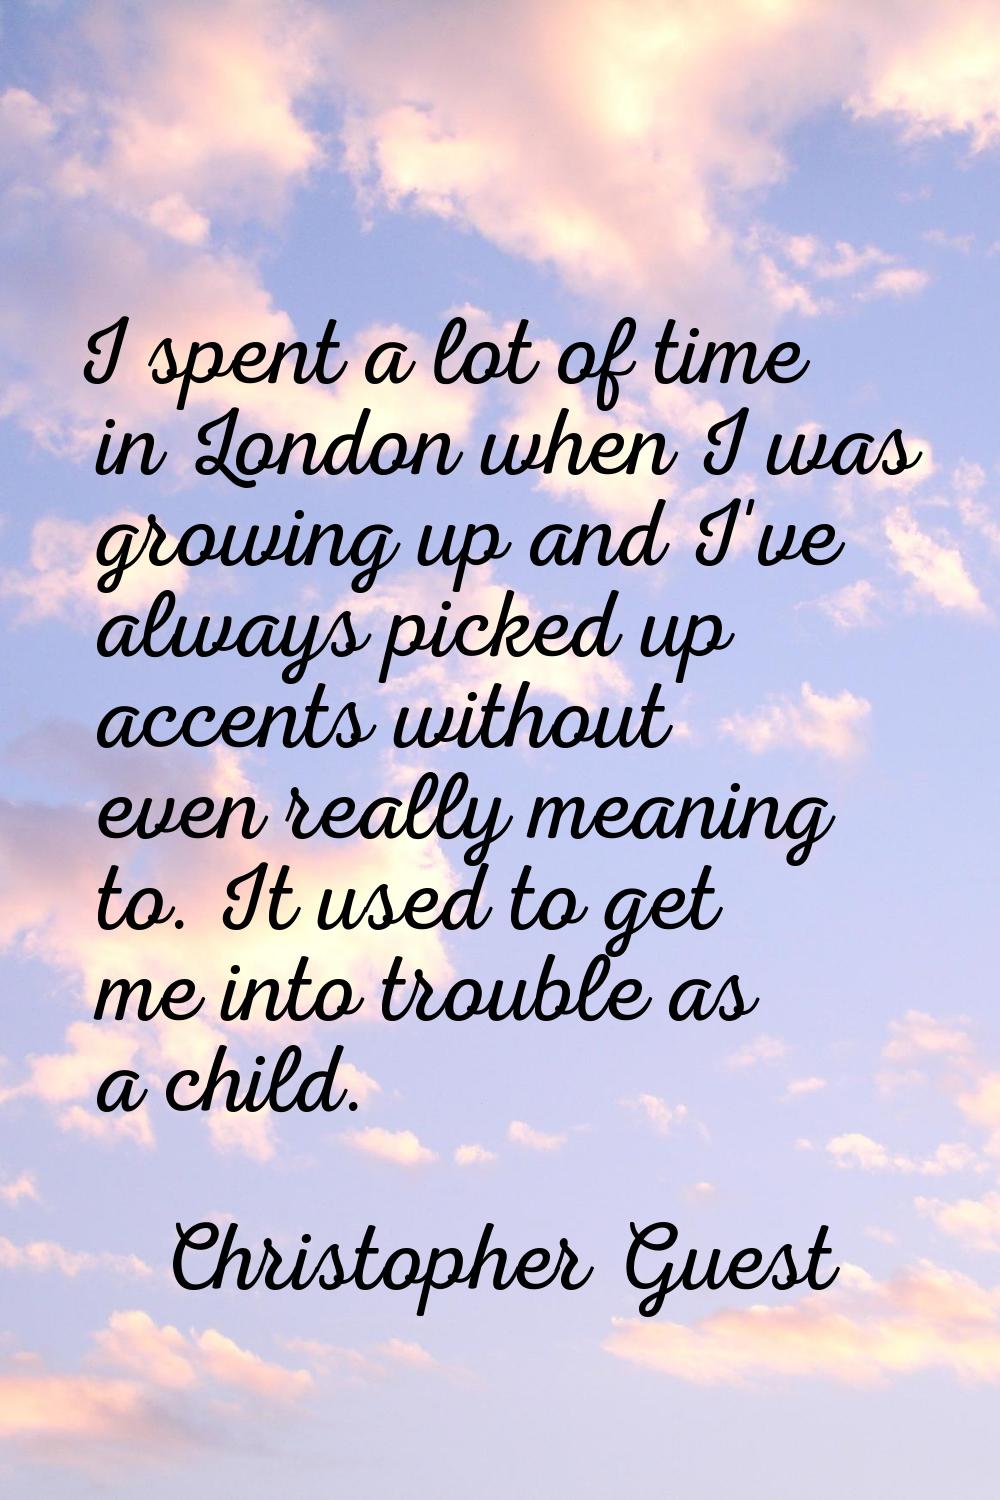 I spent a lot of time in London when I was growing up and I've always picked up accents without eve